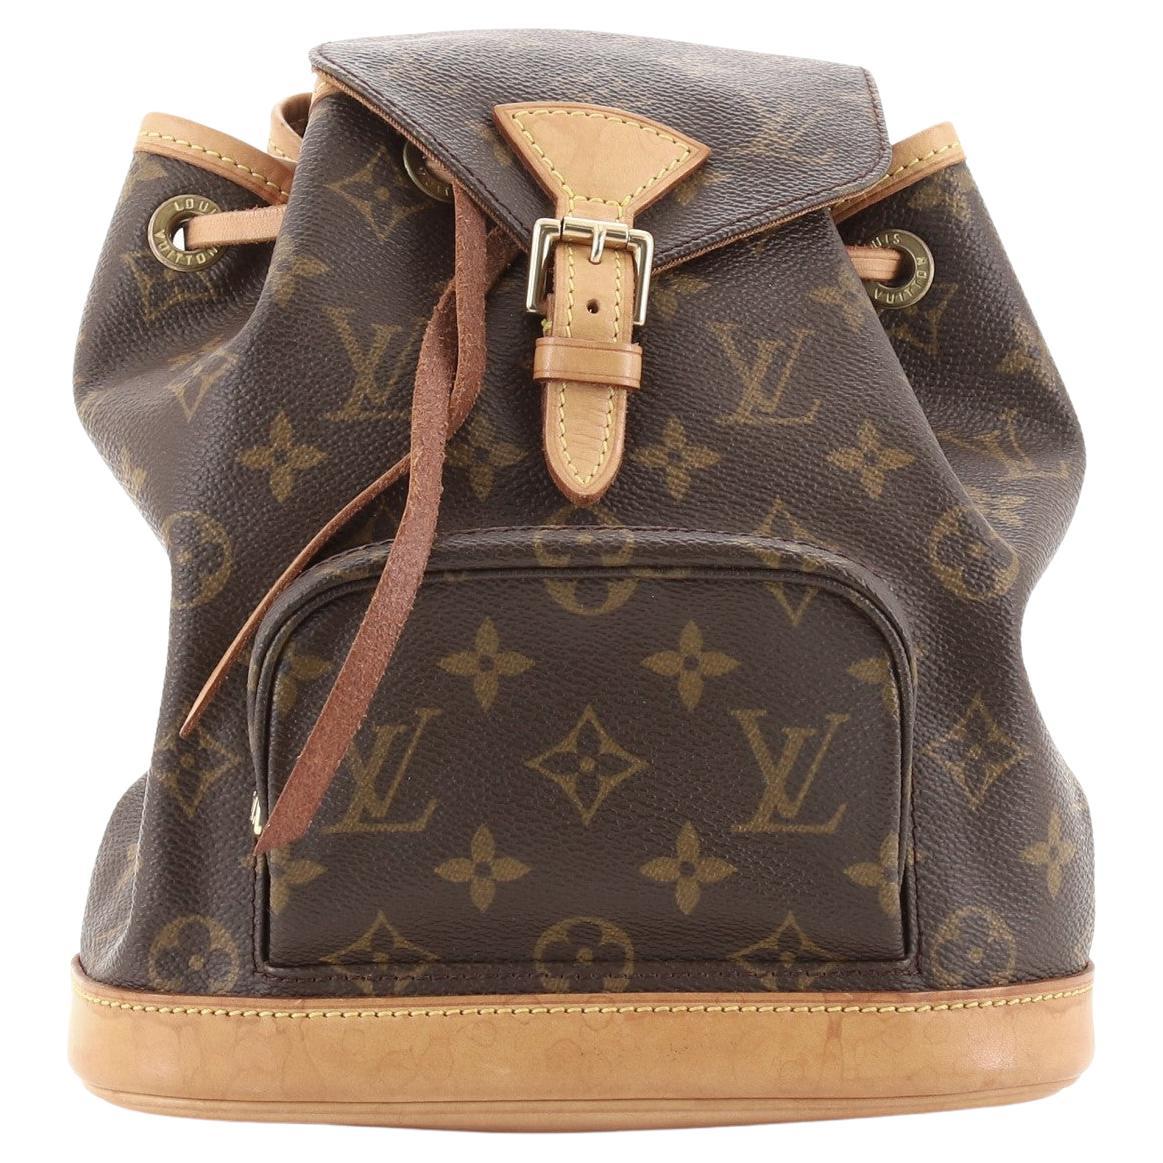 Kendall Jenner Louis Vuitton Backpack Outlet  playgrownedcom 1686442298